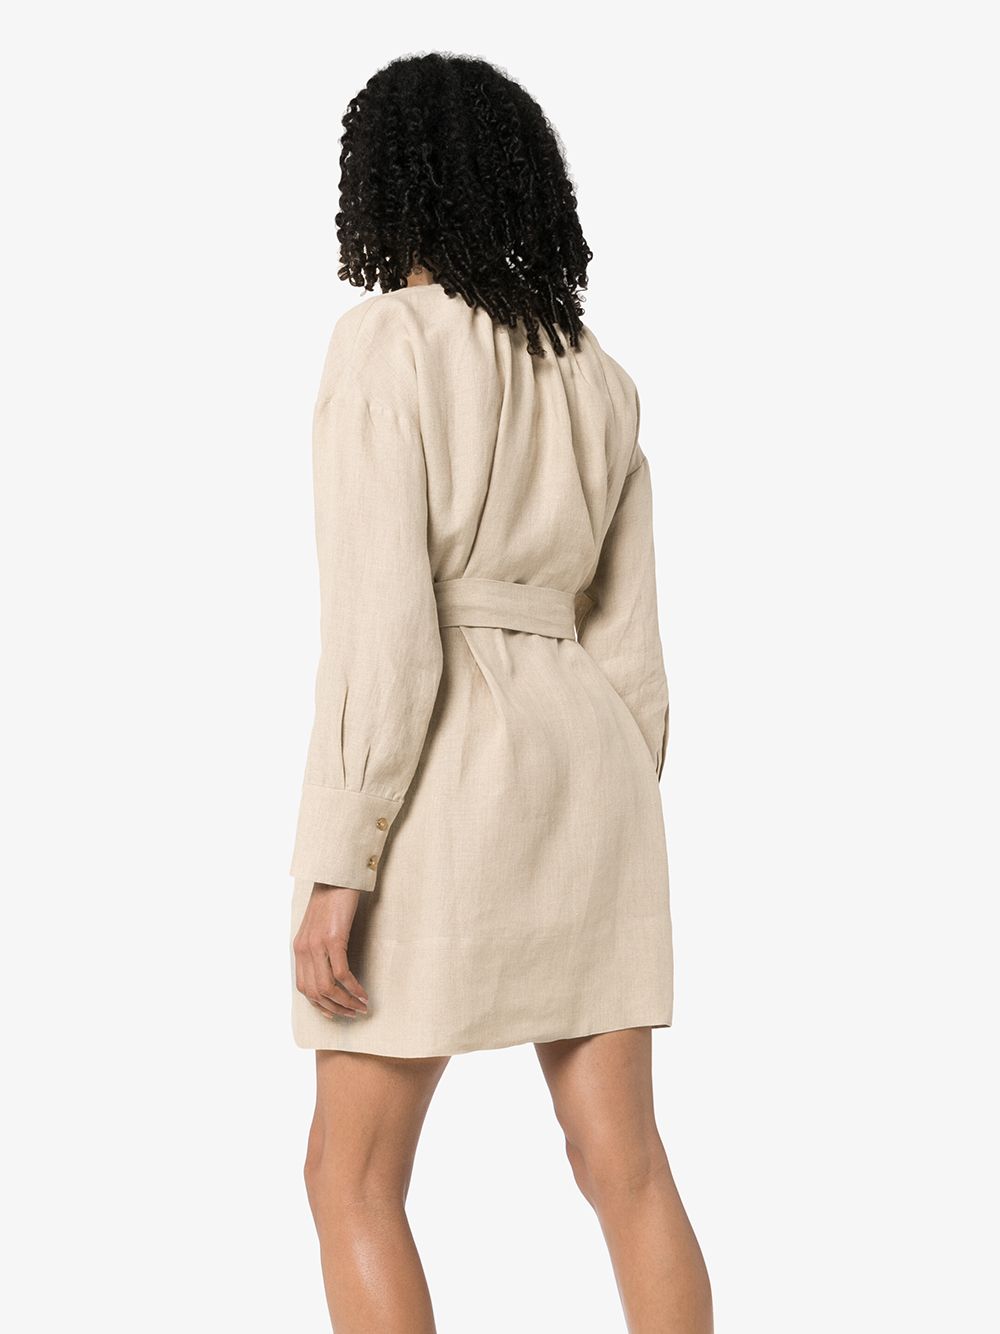 Shop Asceno Santorini belted mini dress with Express Delivery - Farfetch